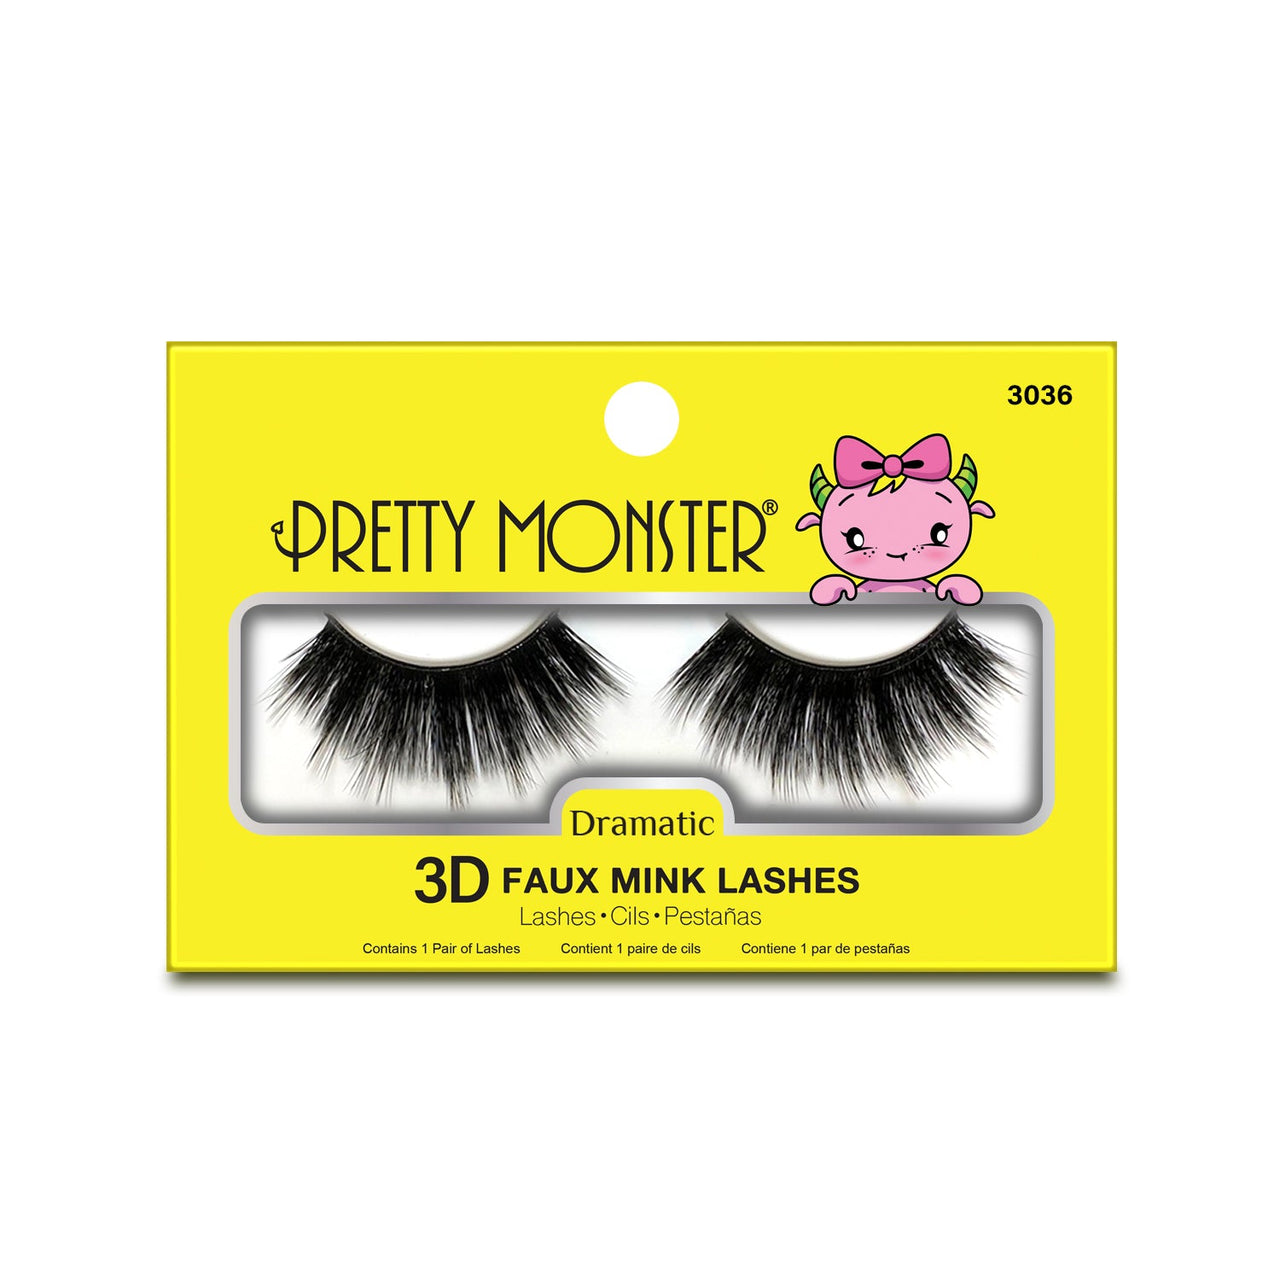 Pretty Monster Dramatic 3D Faux Mink Lashes